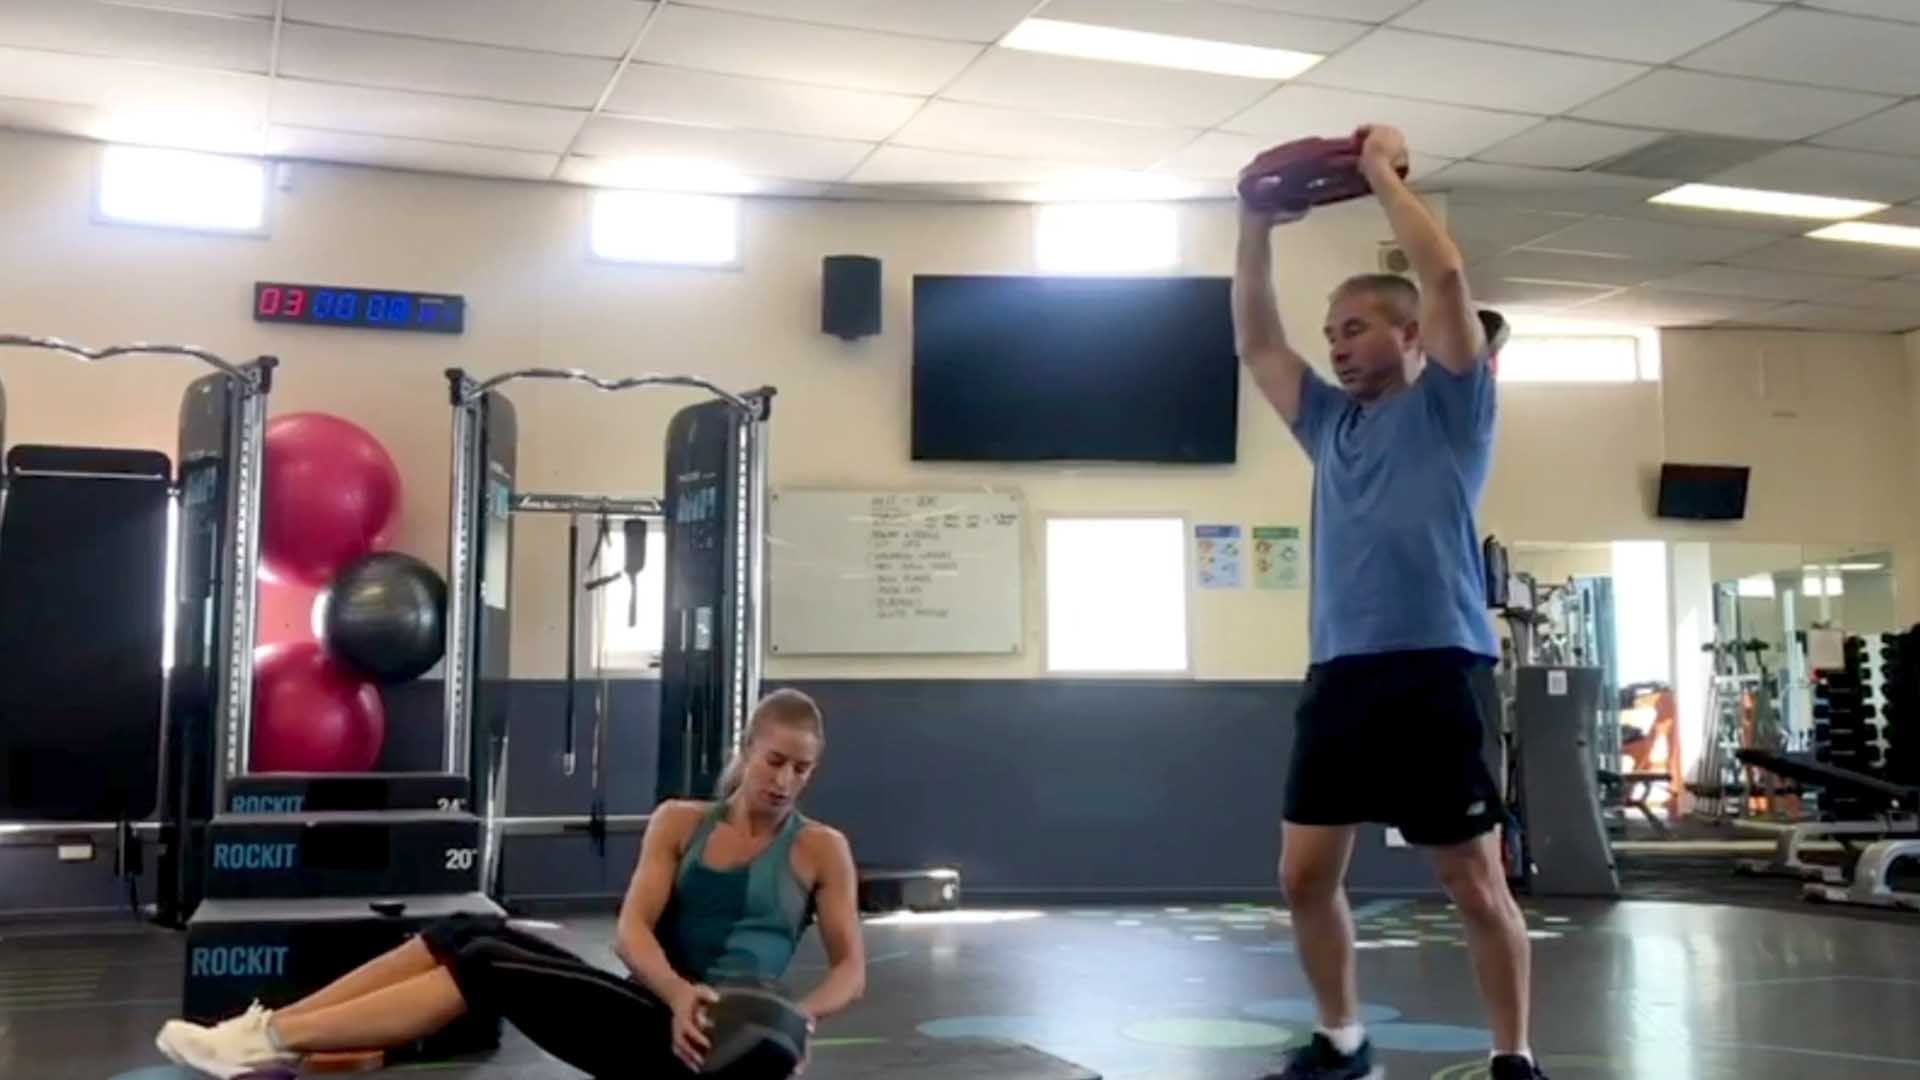 Joe and Lauren leading a workout